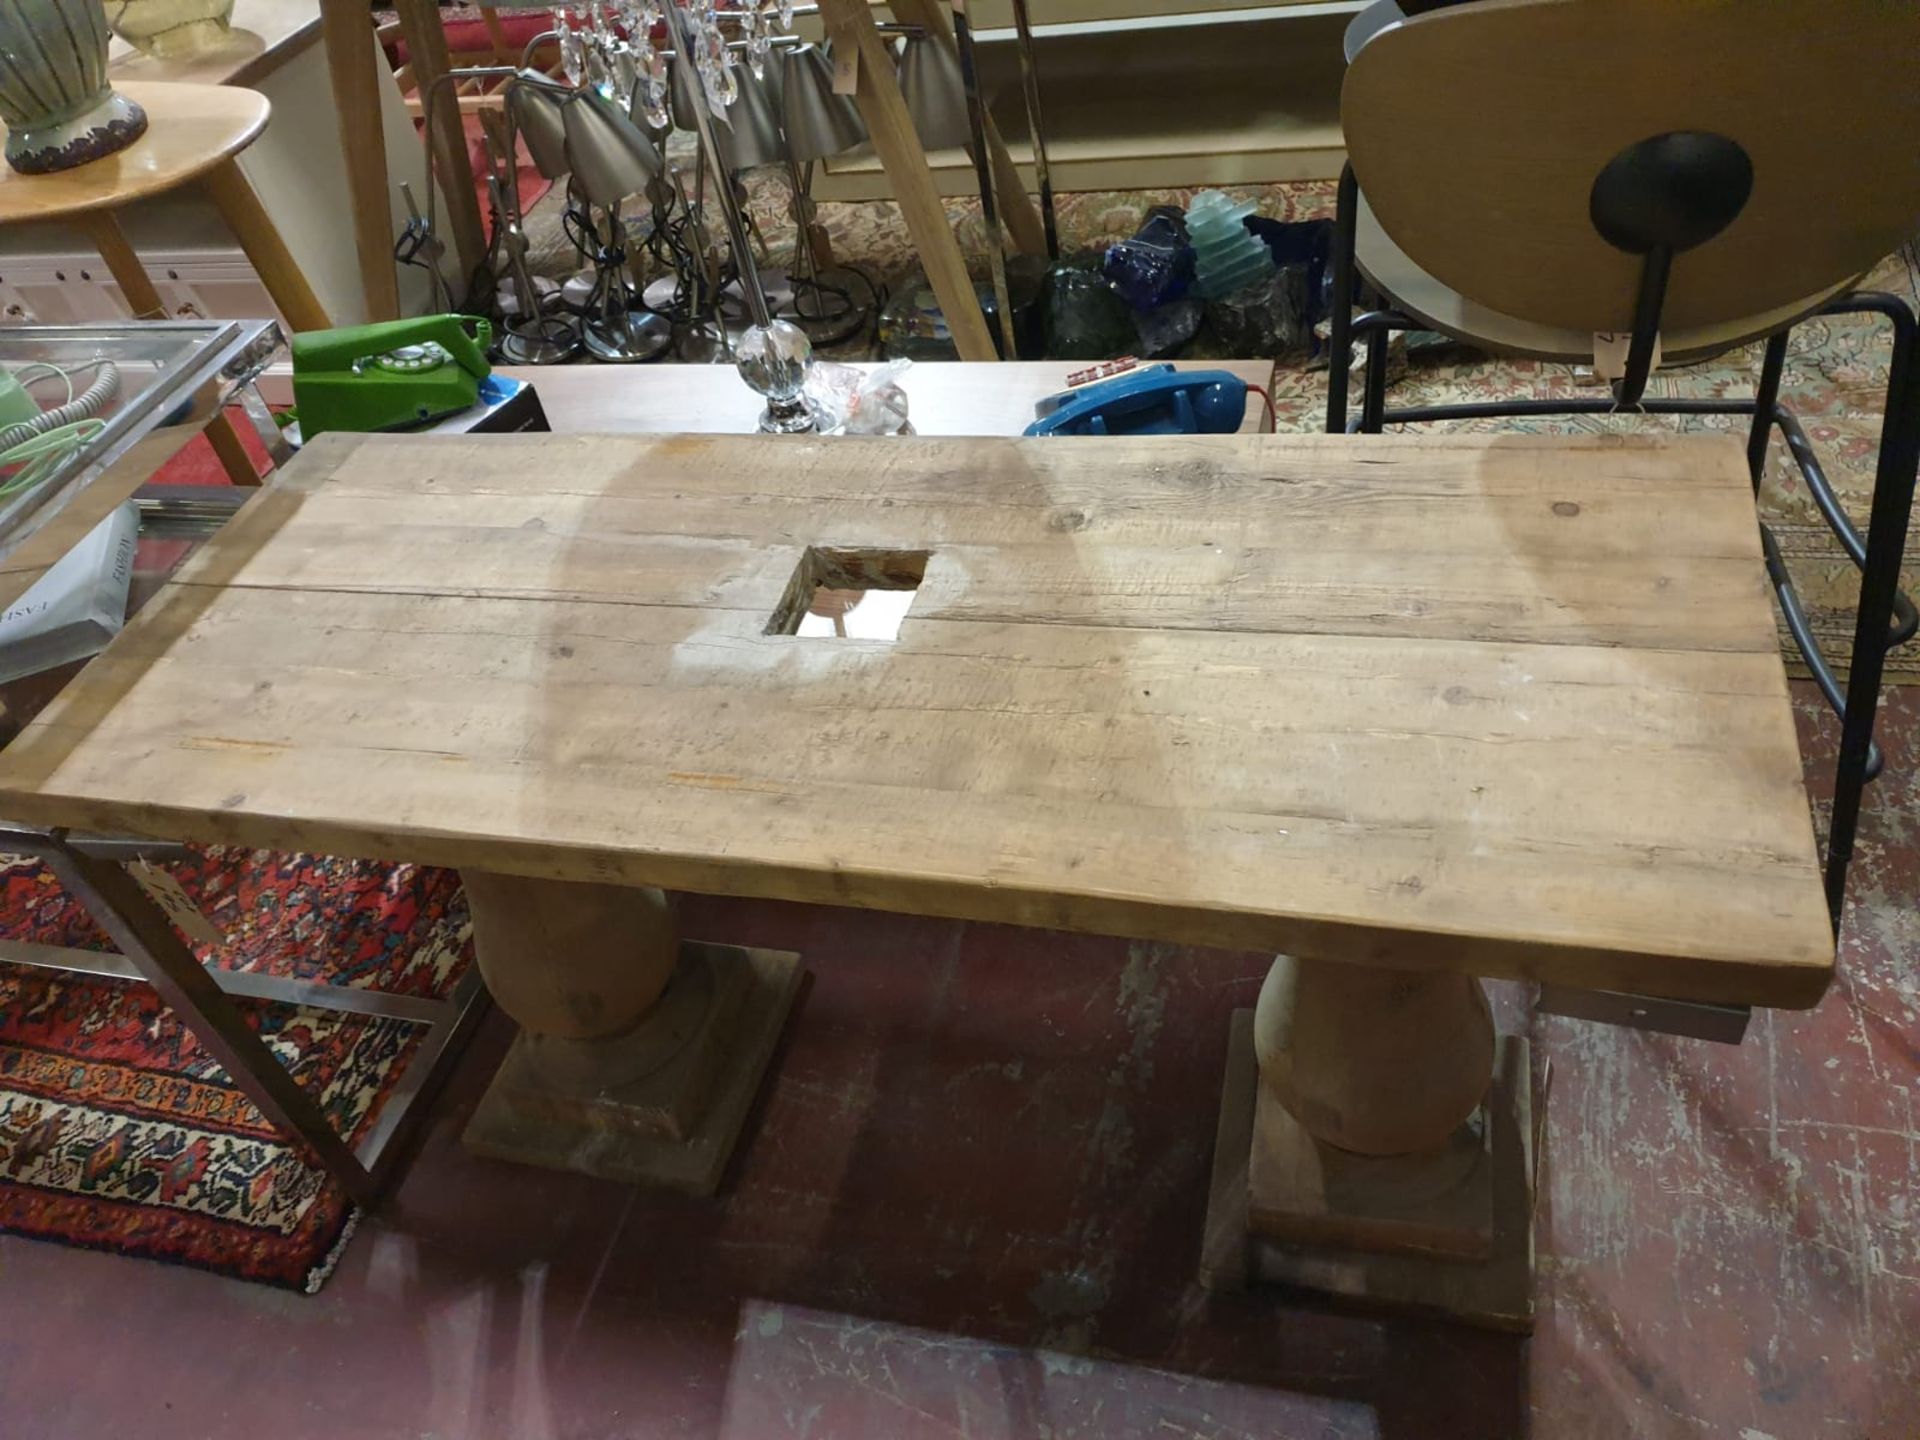 A Rustic Reclaimed Wood Bench Table With Cut Through For Basin 120 X 47 X 65cn (SR195) Ex Showroom - Bild 2 aus 2